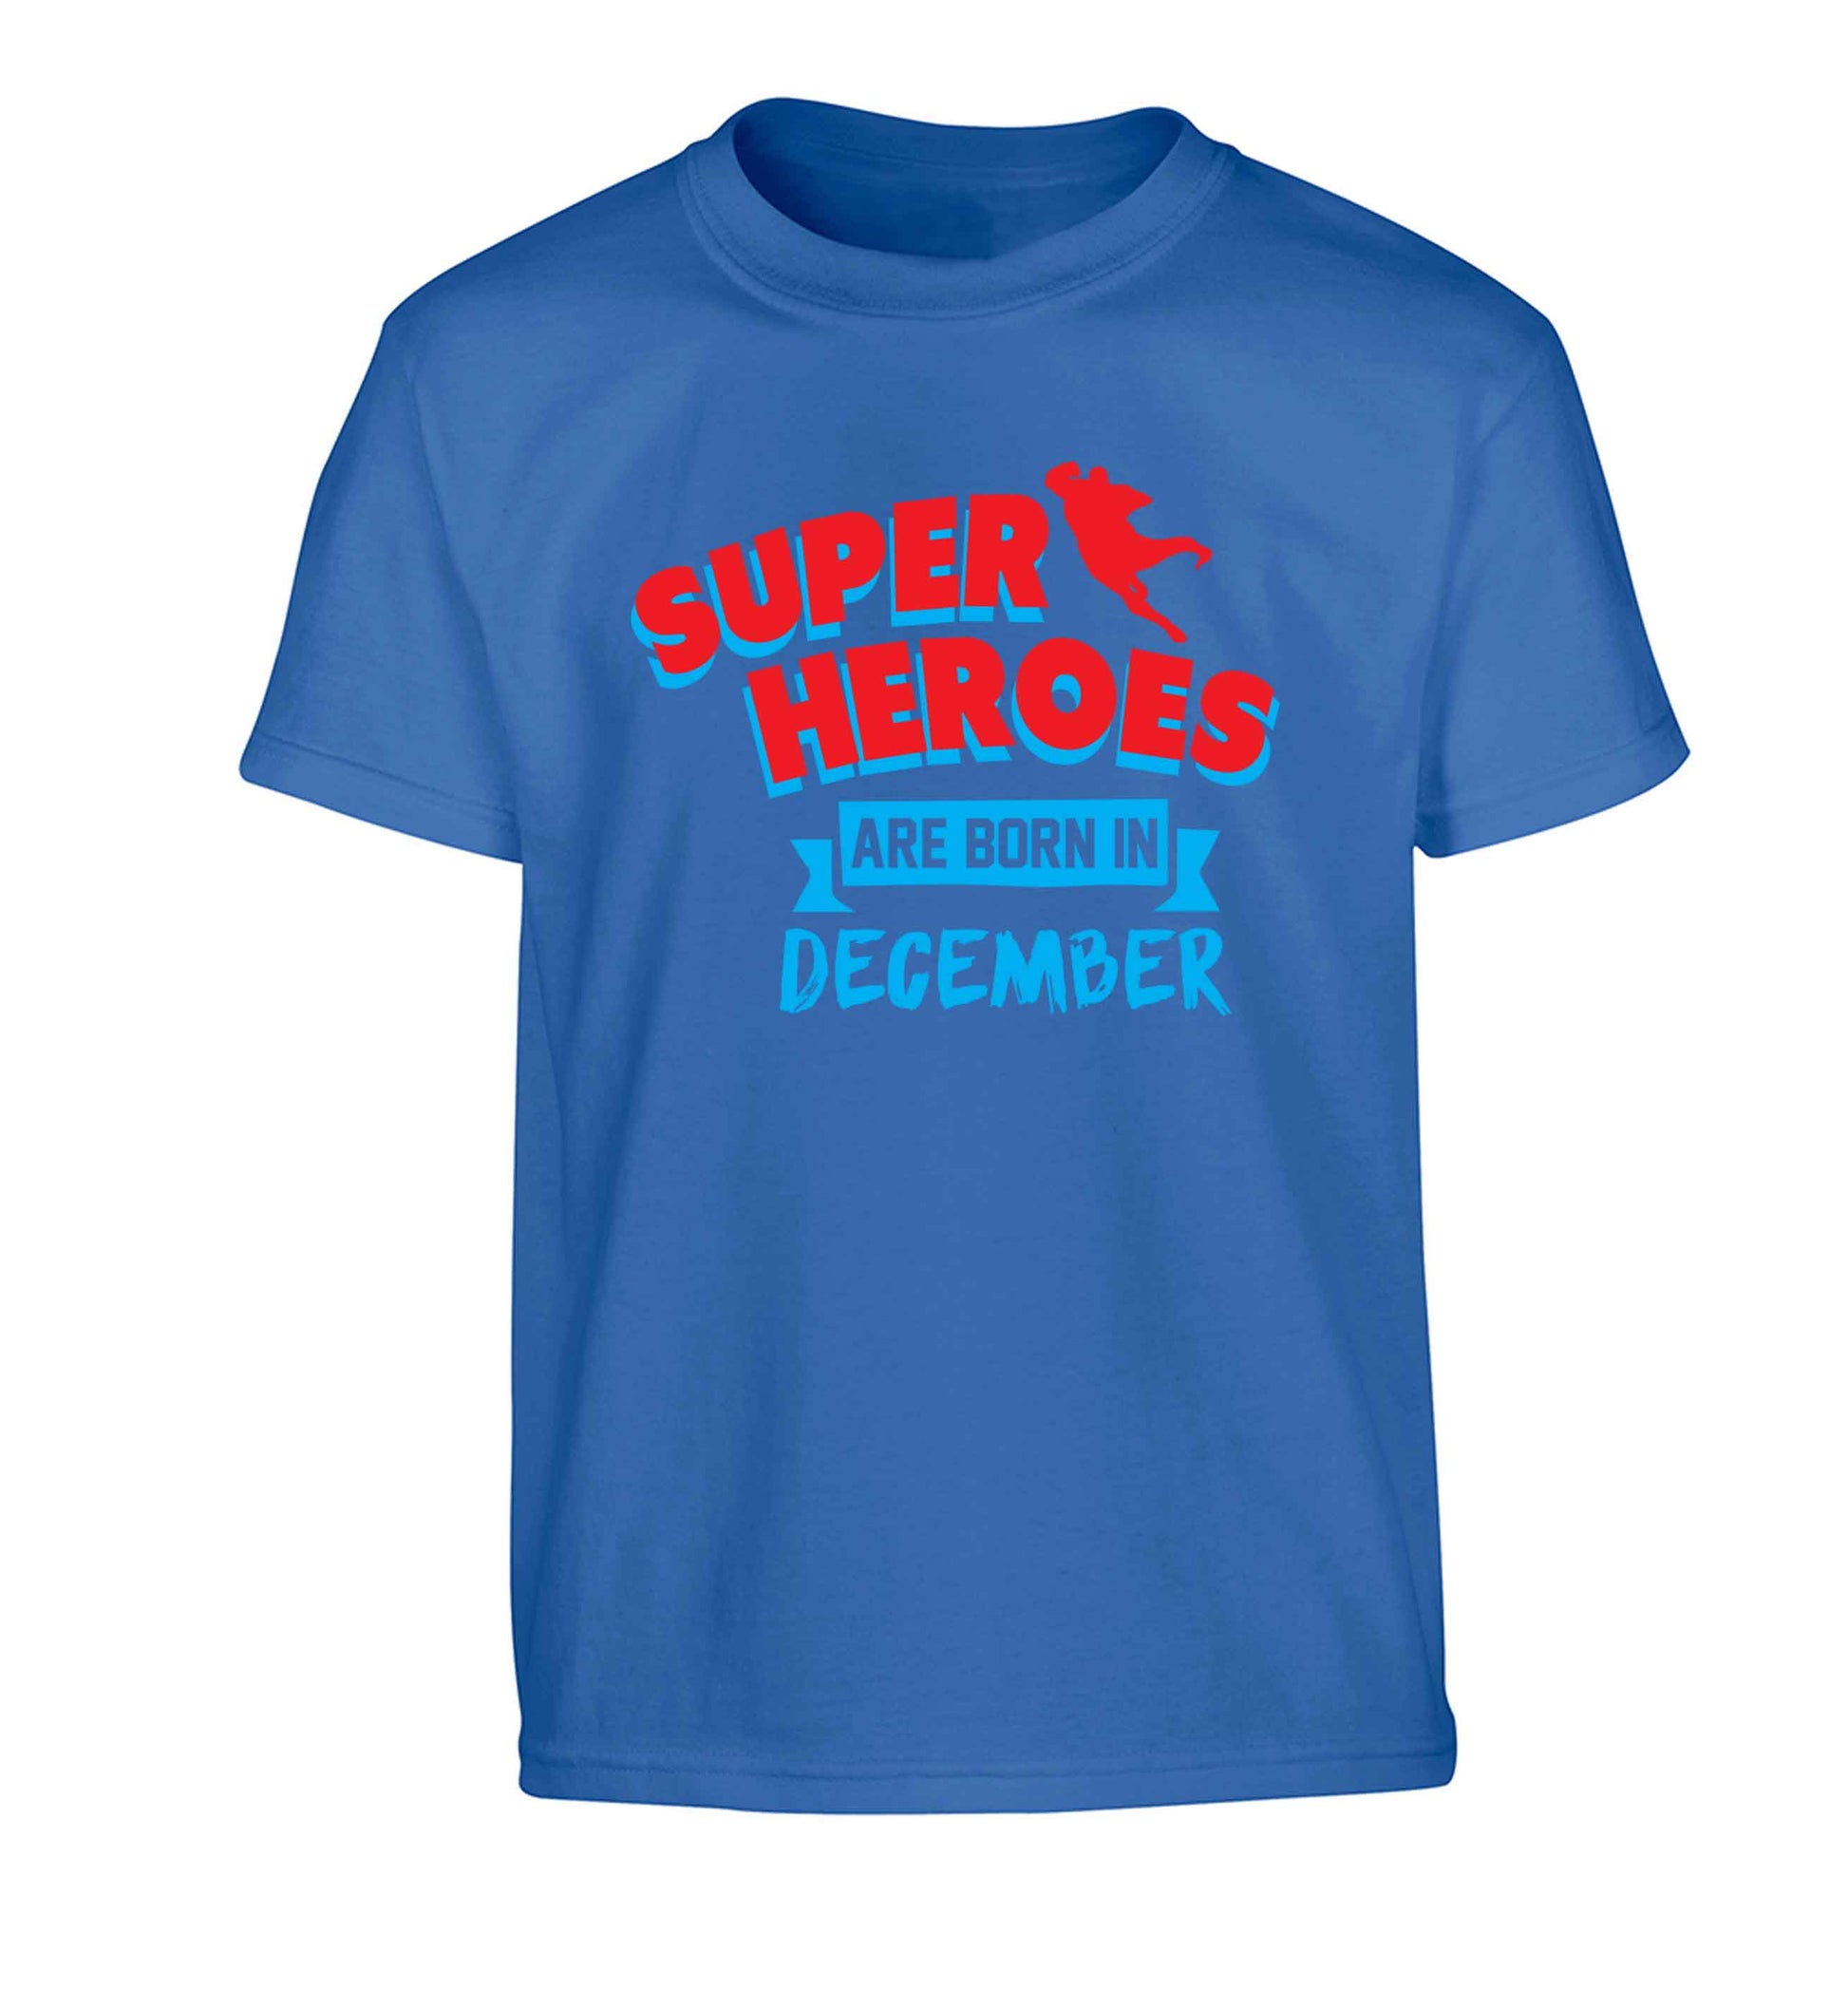 Superheroes are born in December Children's blue Tshirt 12-13 Years